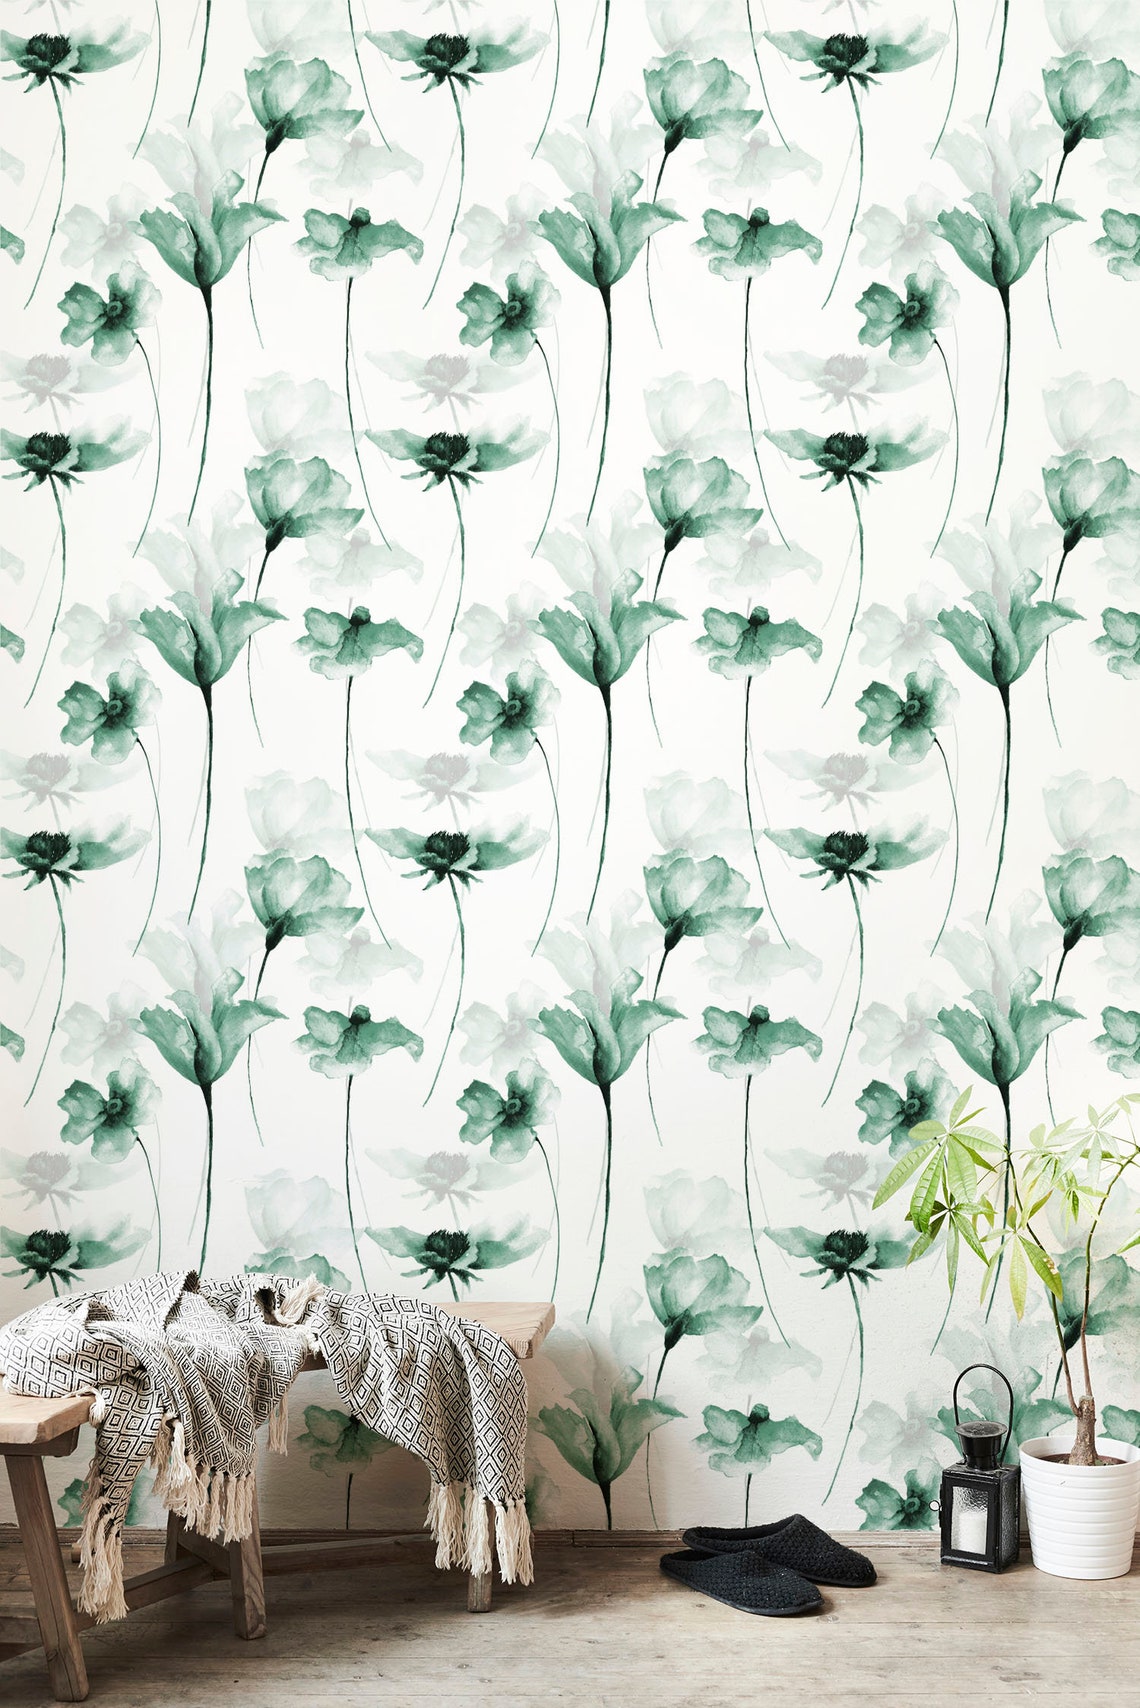 Peel and Stick Wallpaper Floral Wallpaper White & Green | Etsy